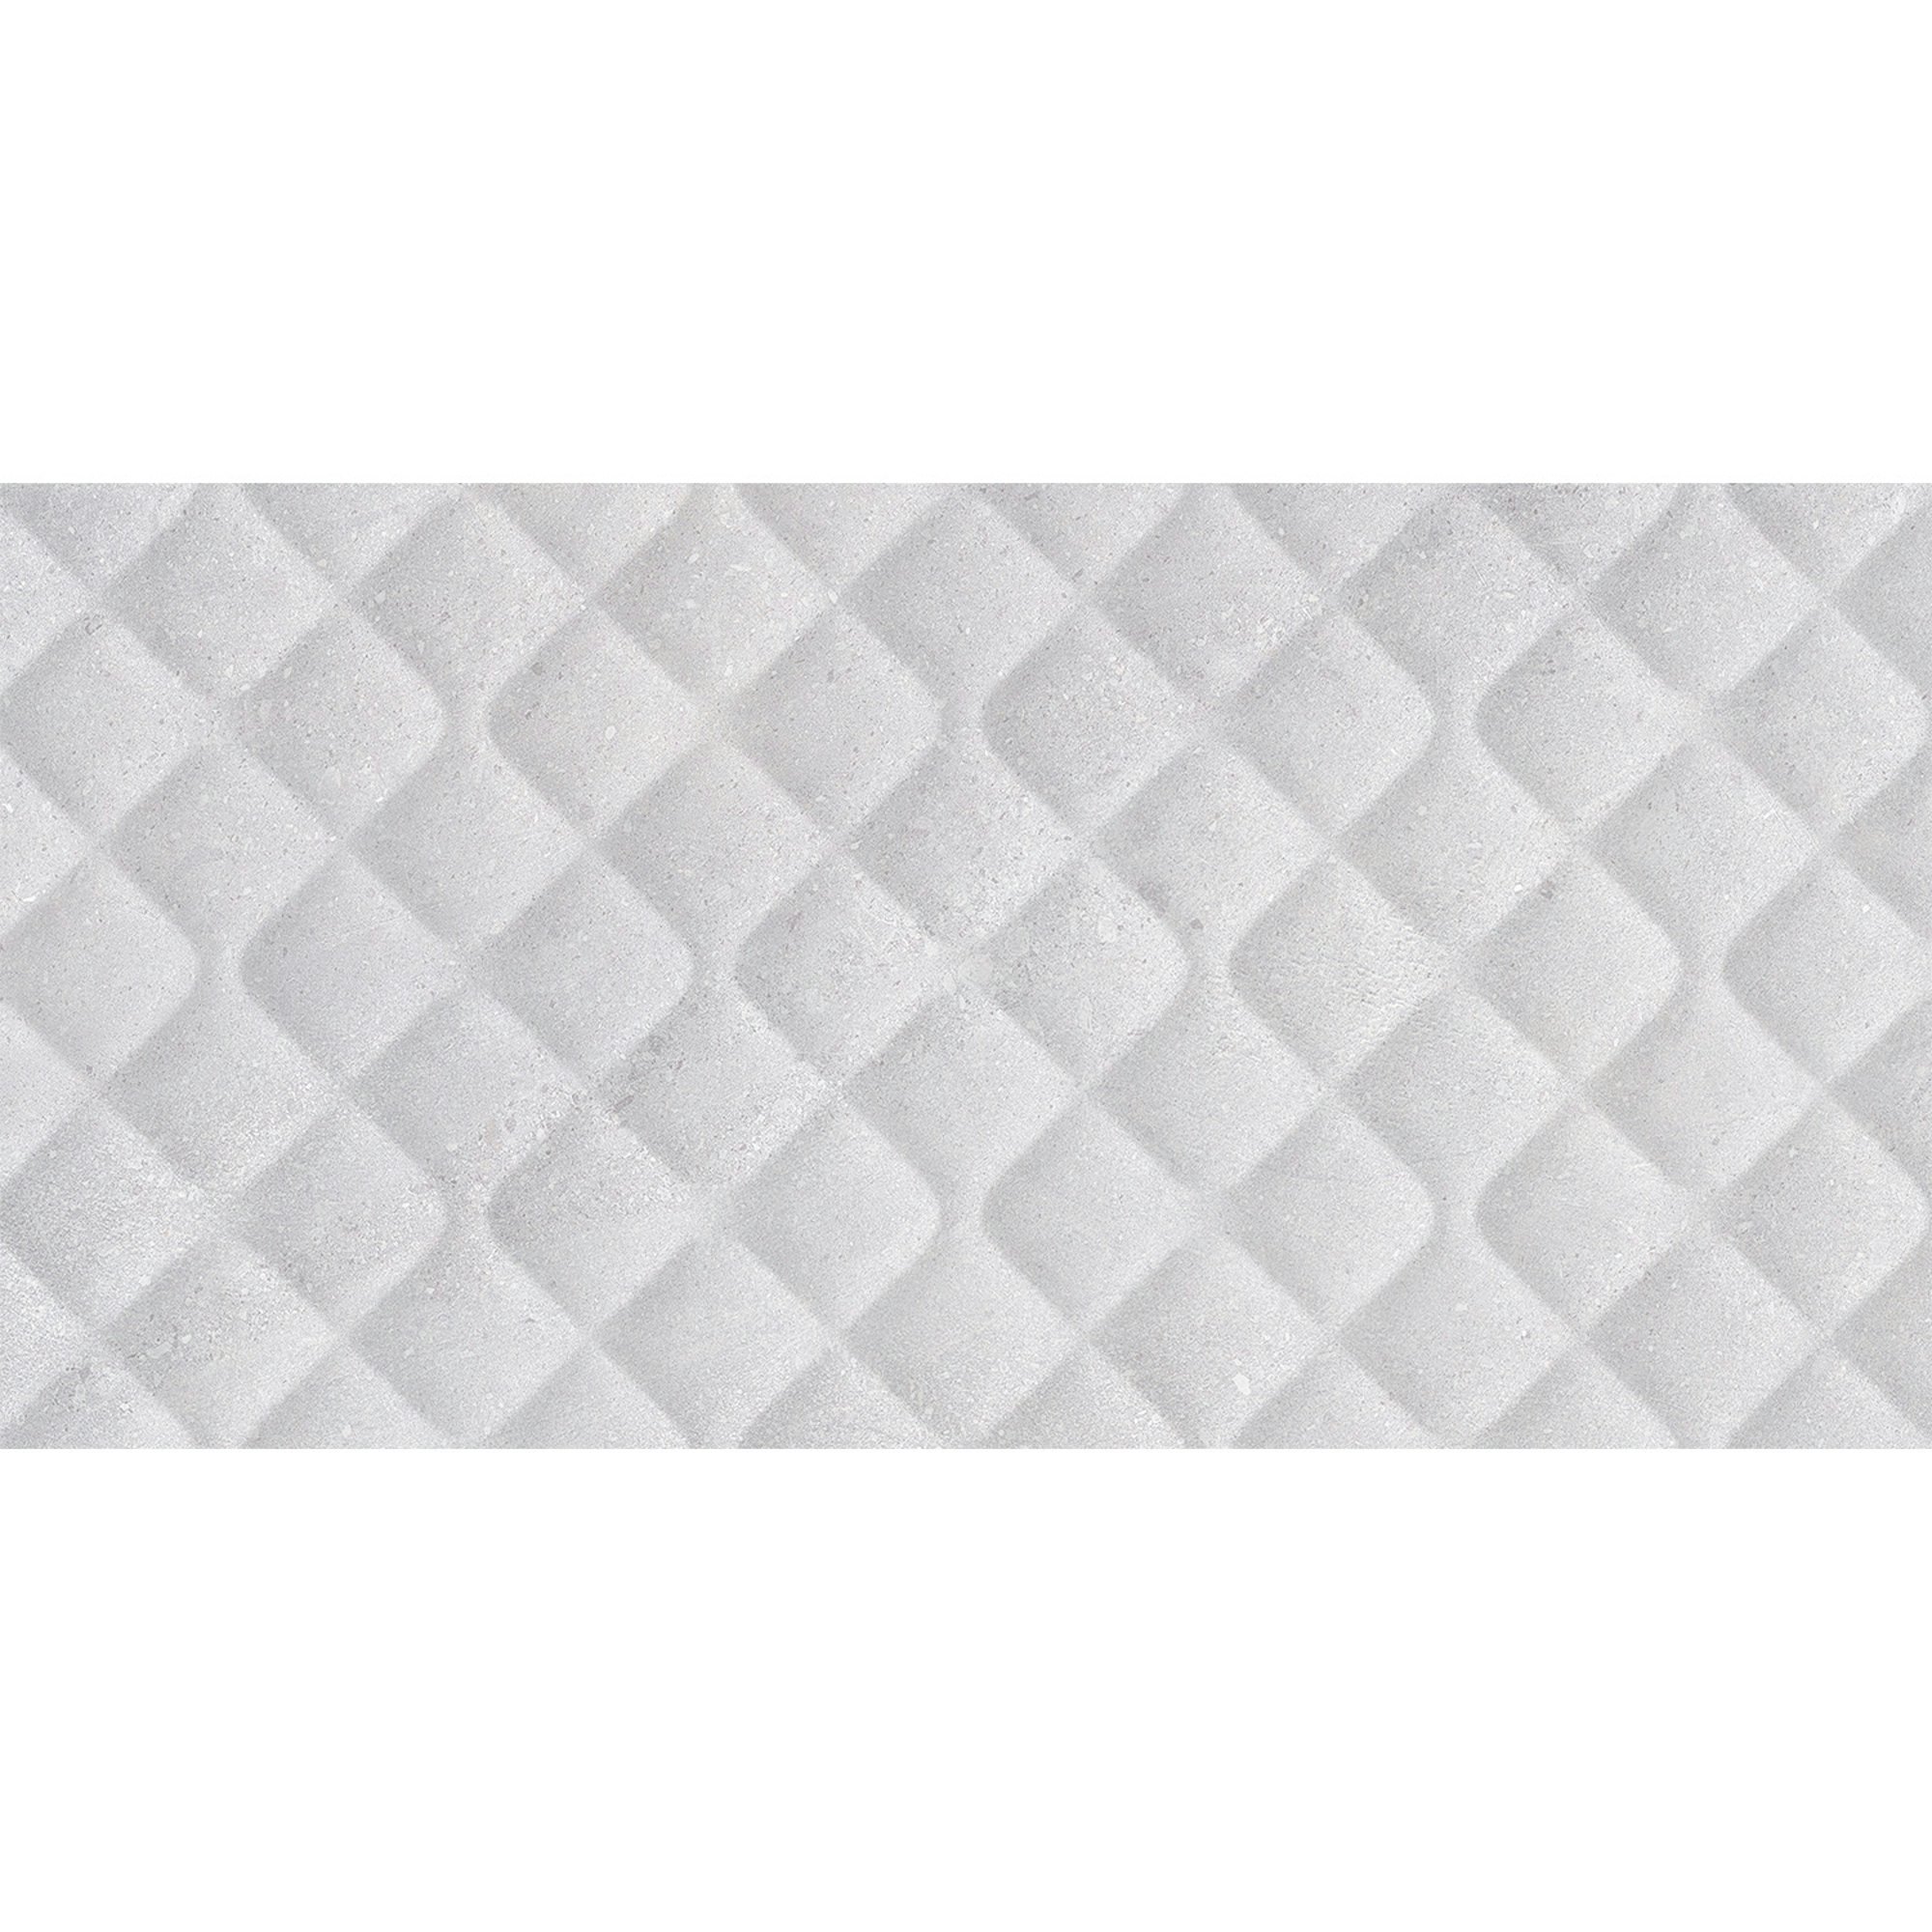 Fontwell Pearl Textured Decor Tile